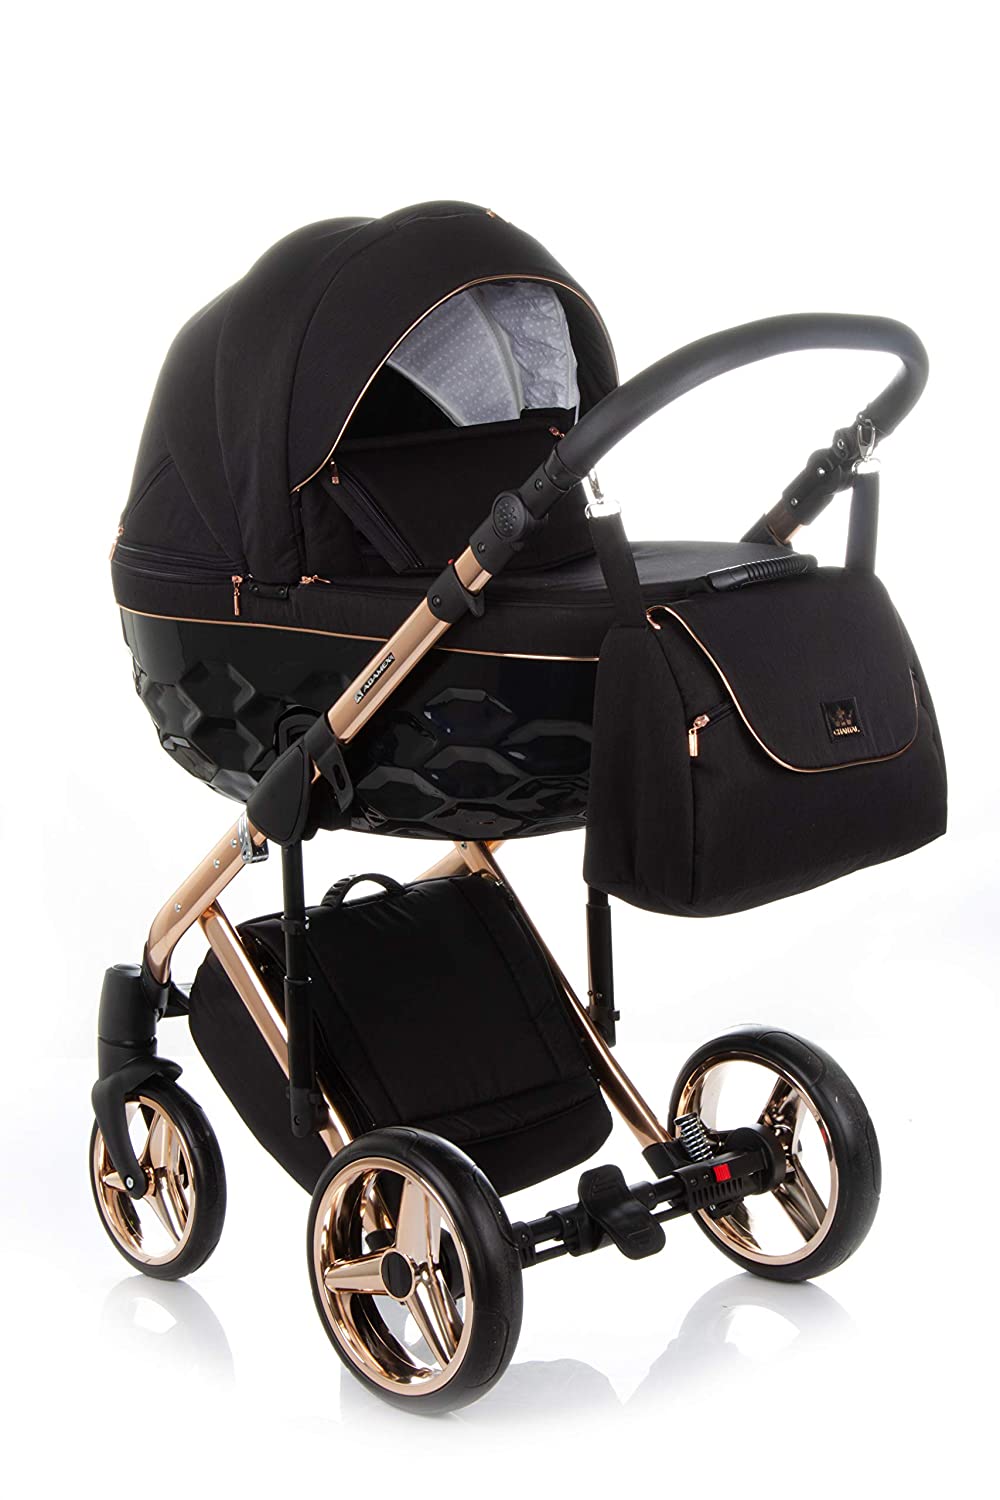 Adamex Chantal Pushchair Complete Set with Changing Mat + Film + Mosquito Net + Drinks Holder and Winter Muffs